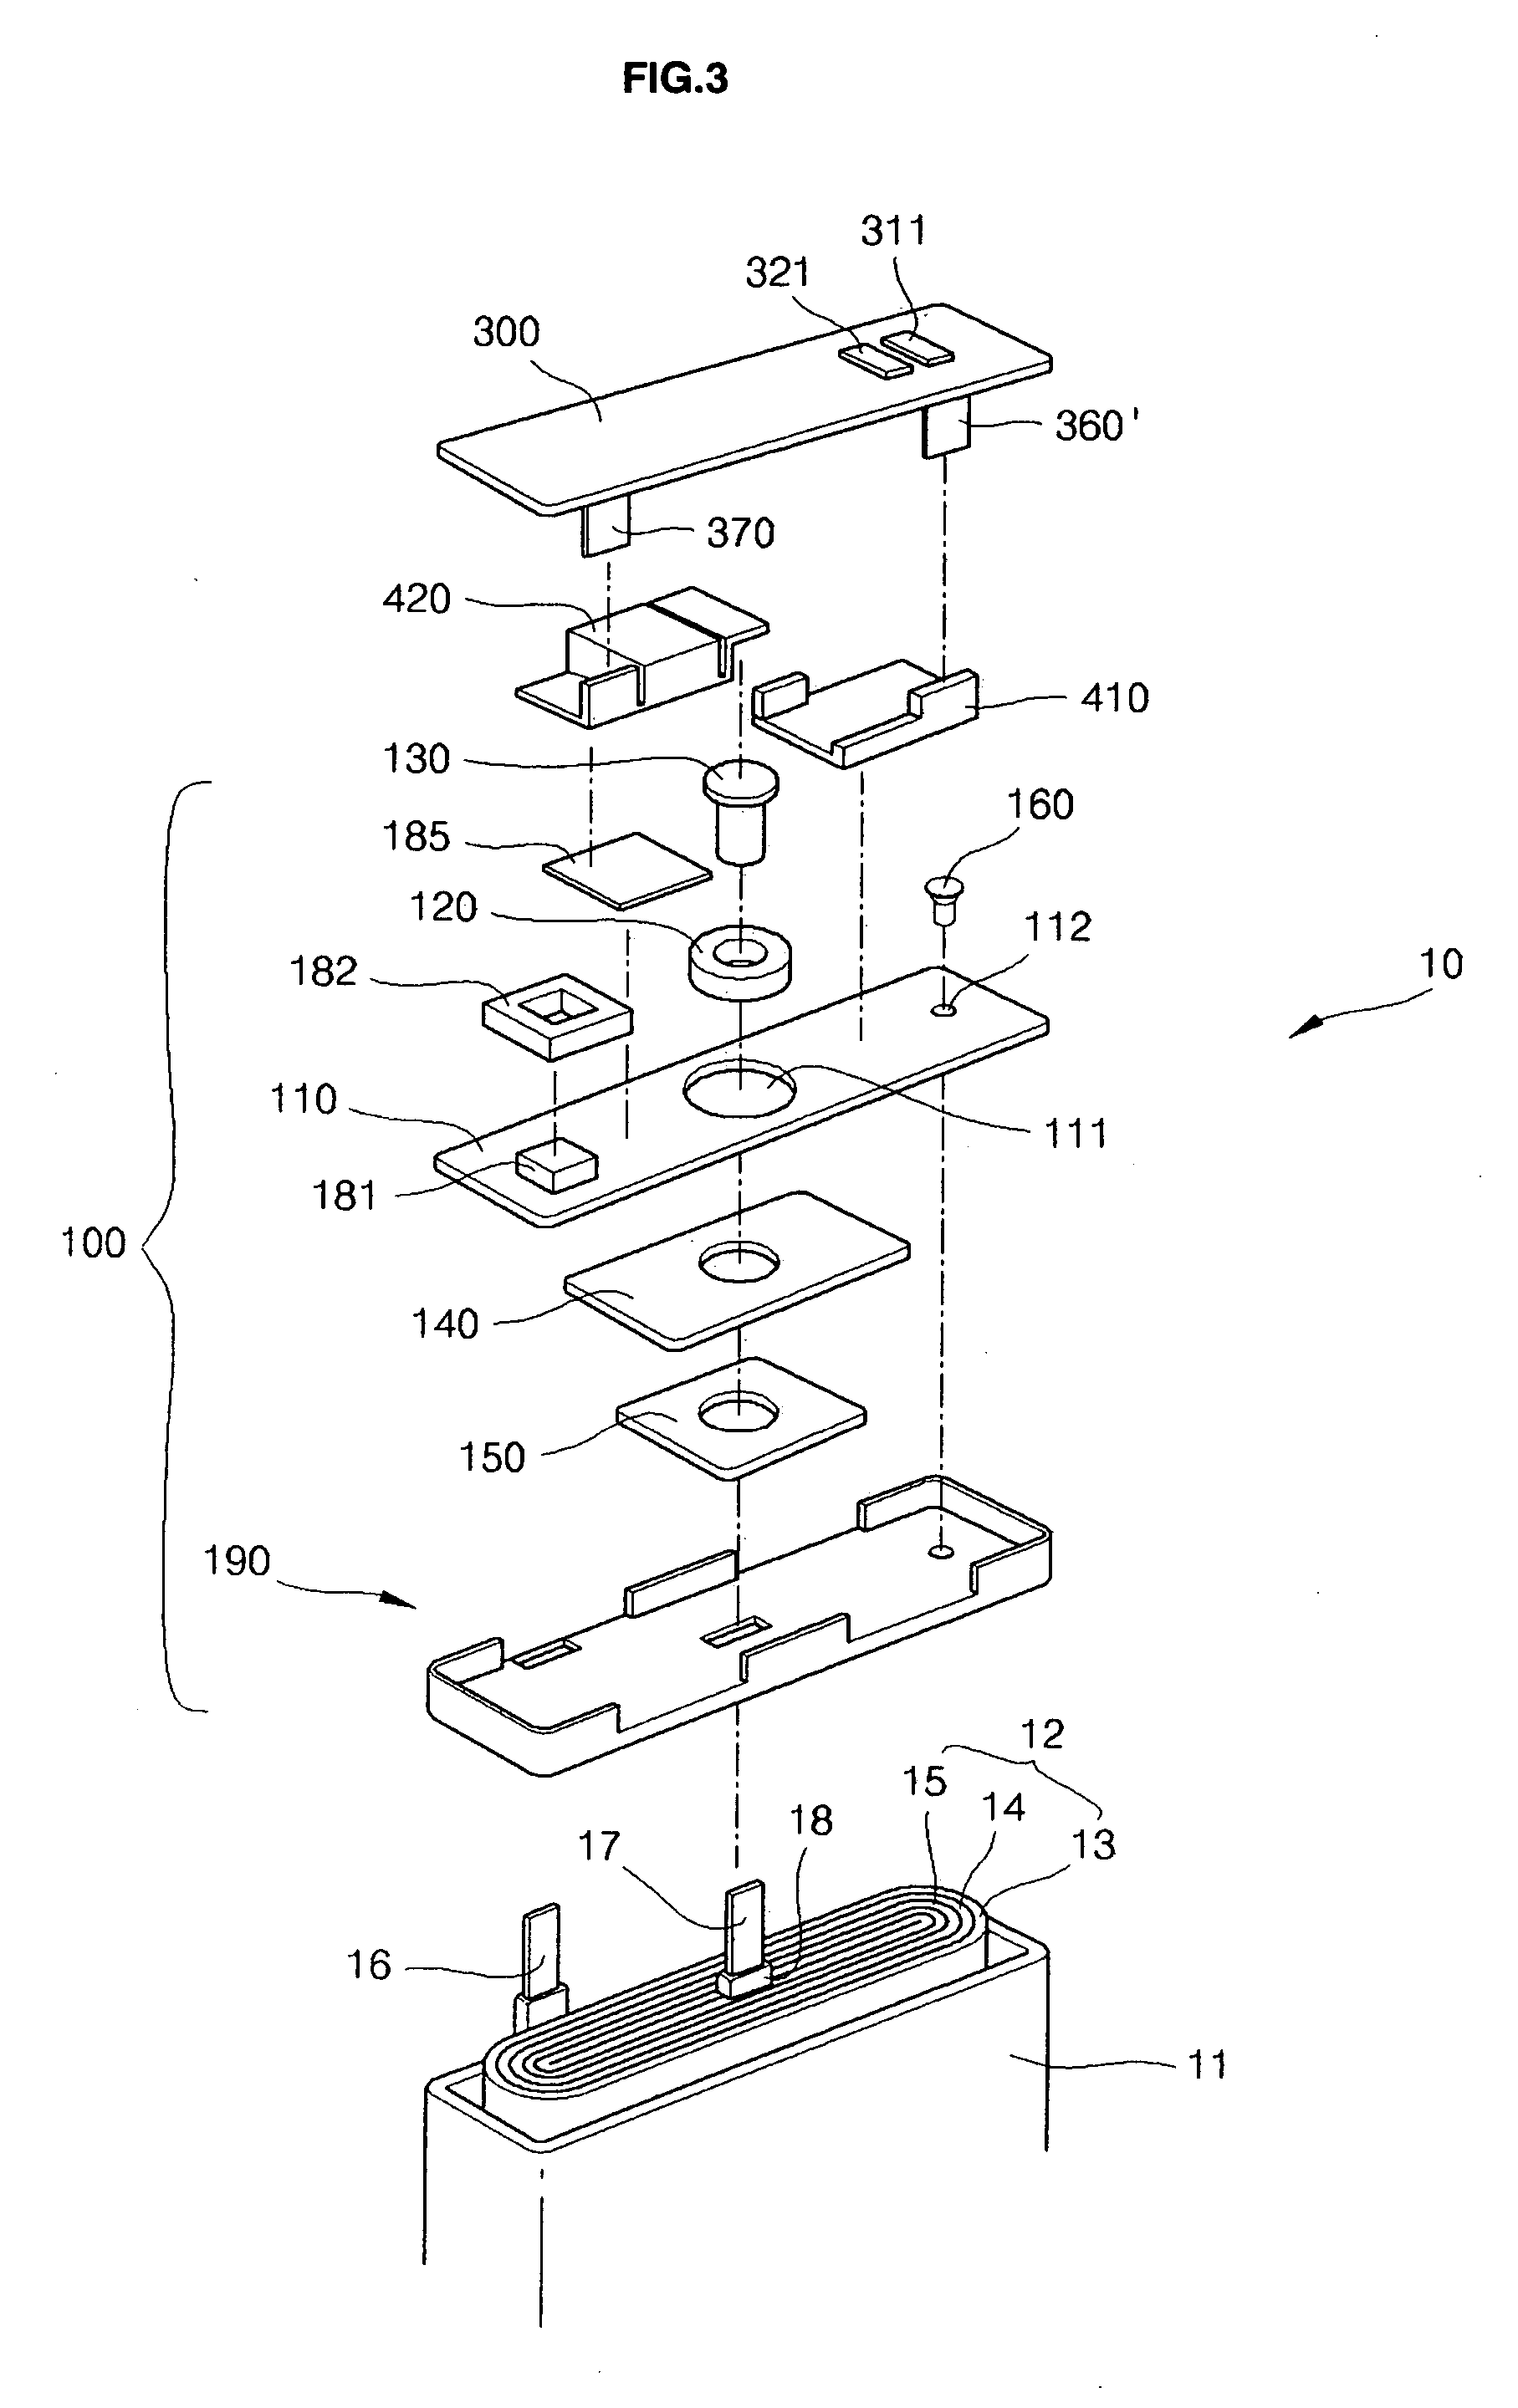 Secondary battery with enhanced connection of protection circuit unit to cap plate